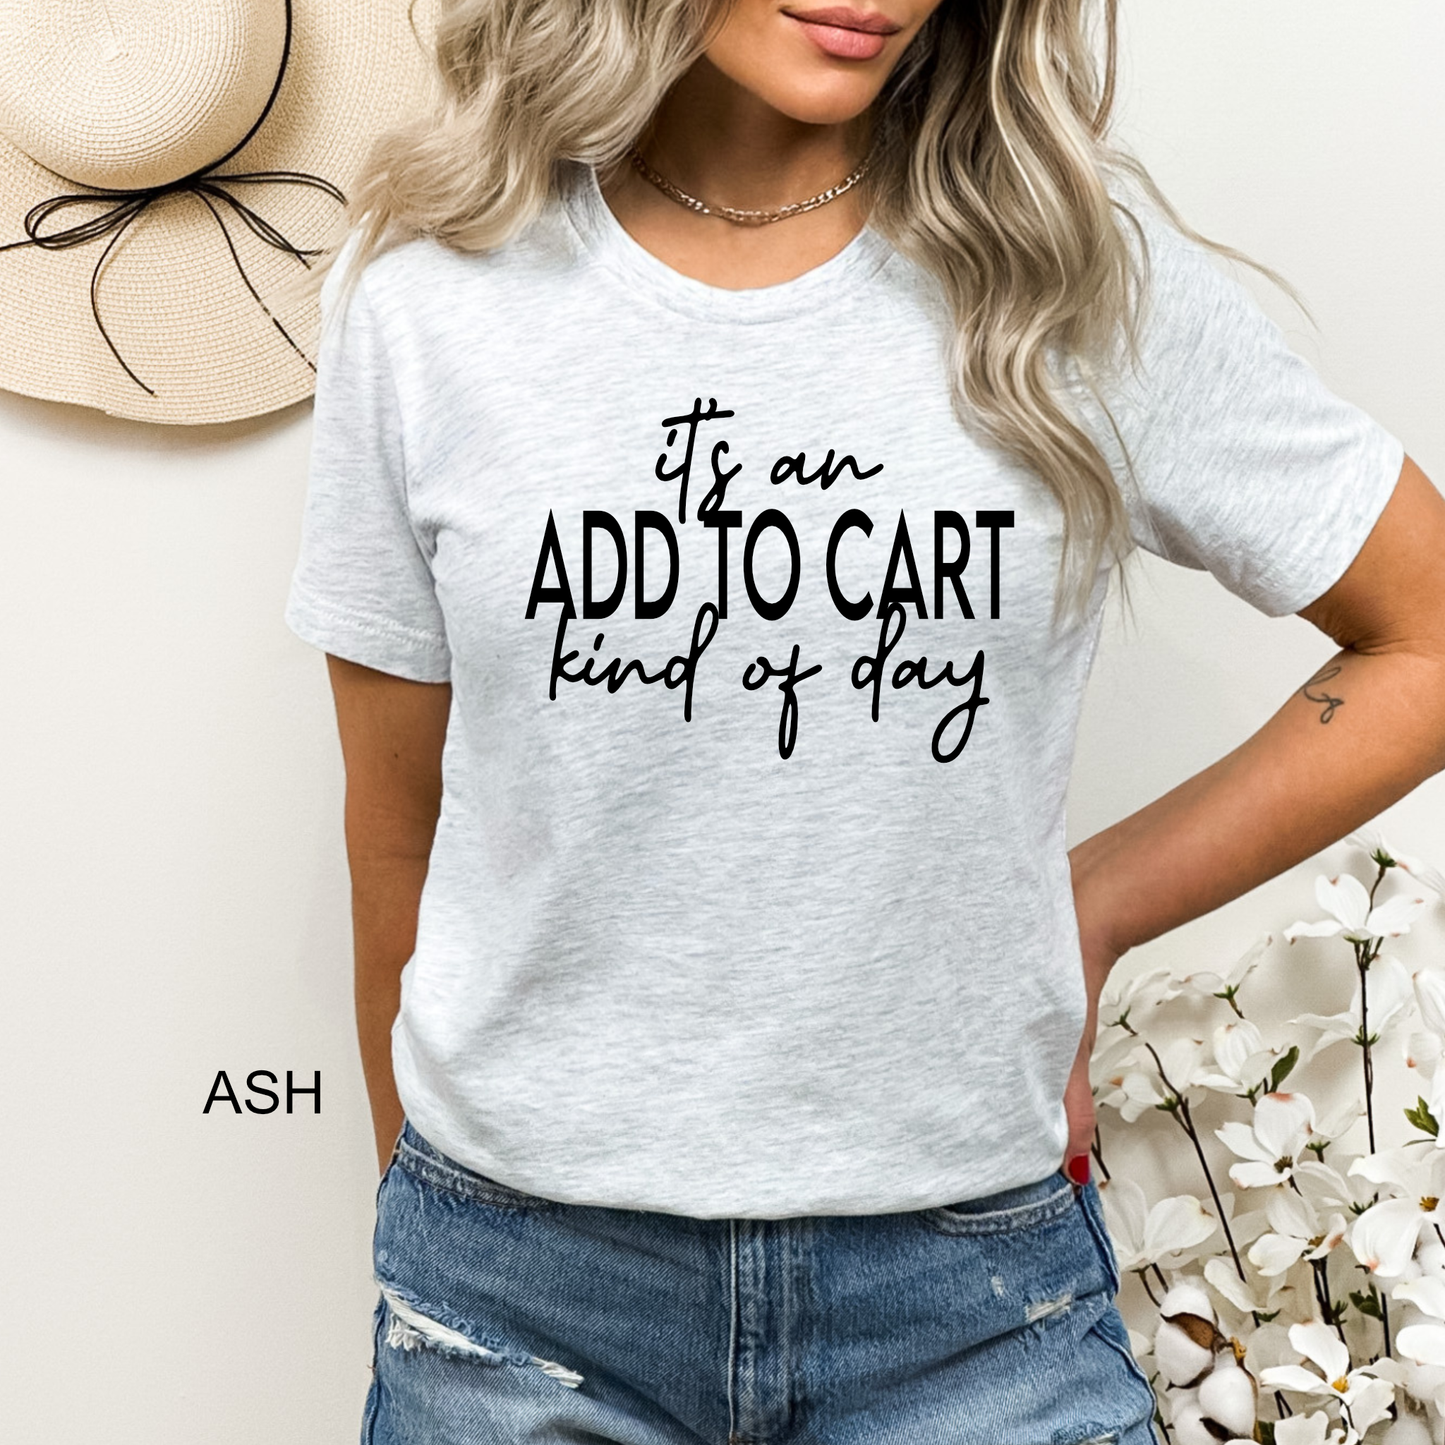 It's an ADD TO CART kind of day Tee